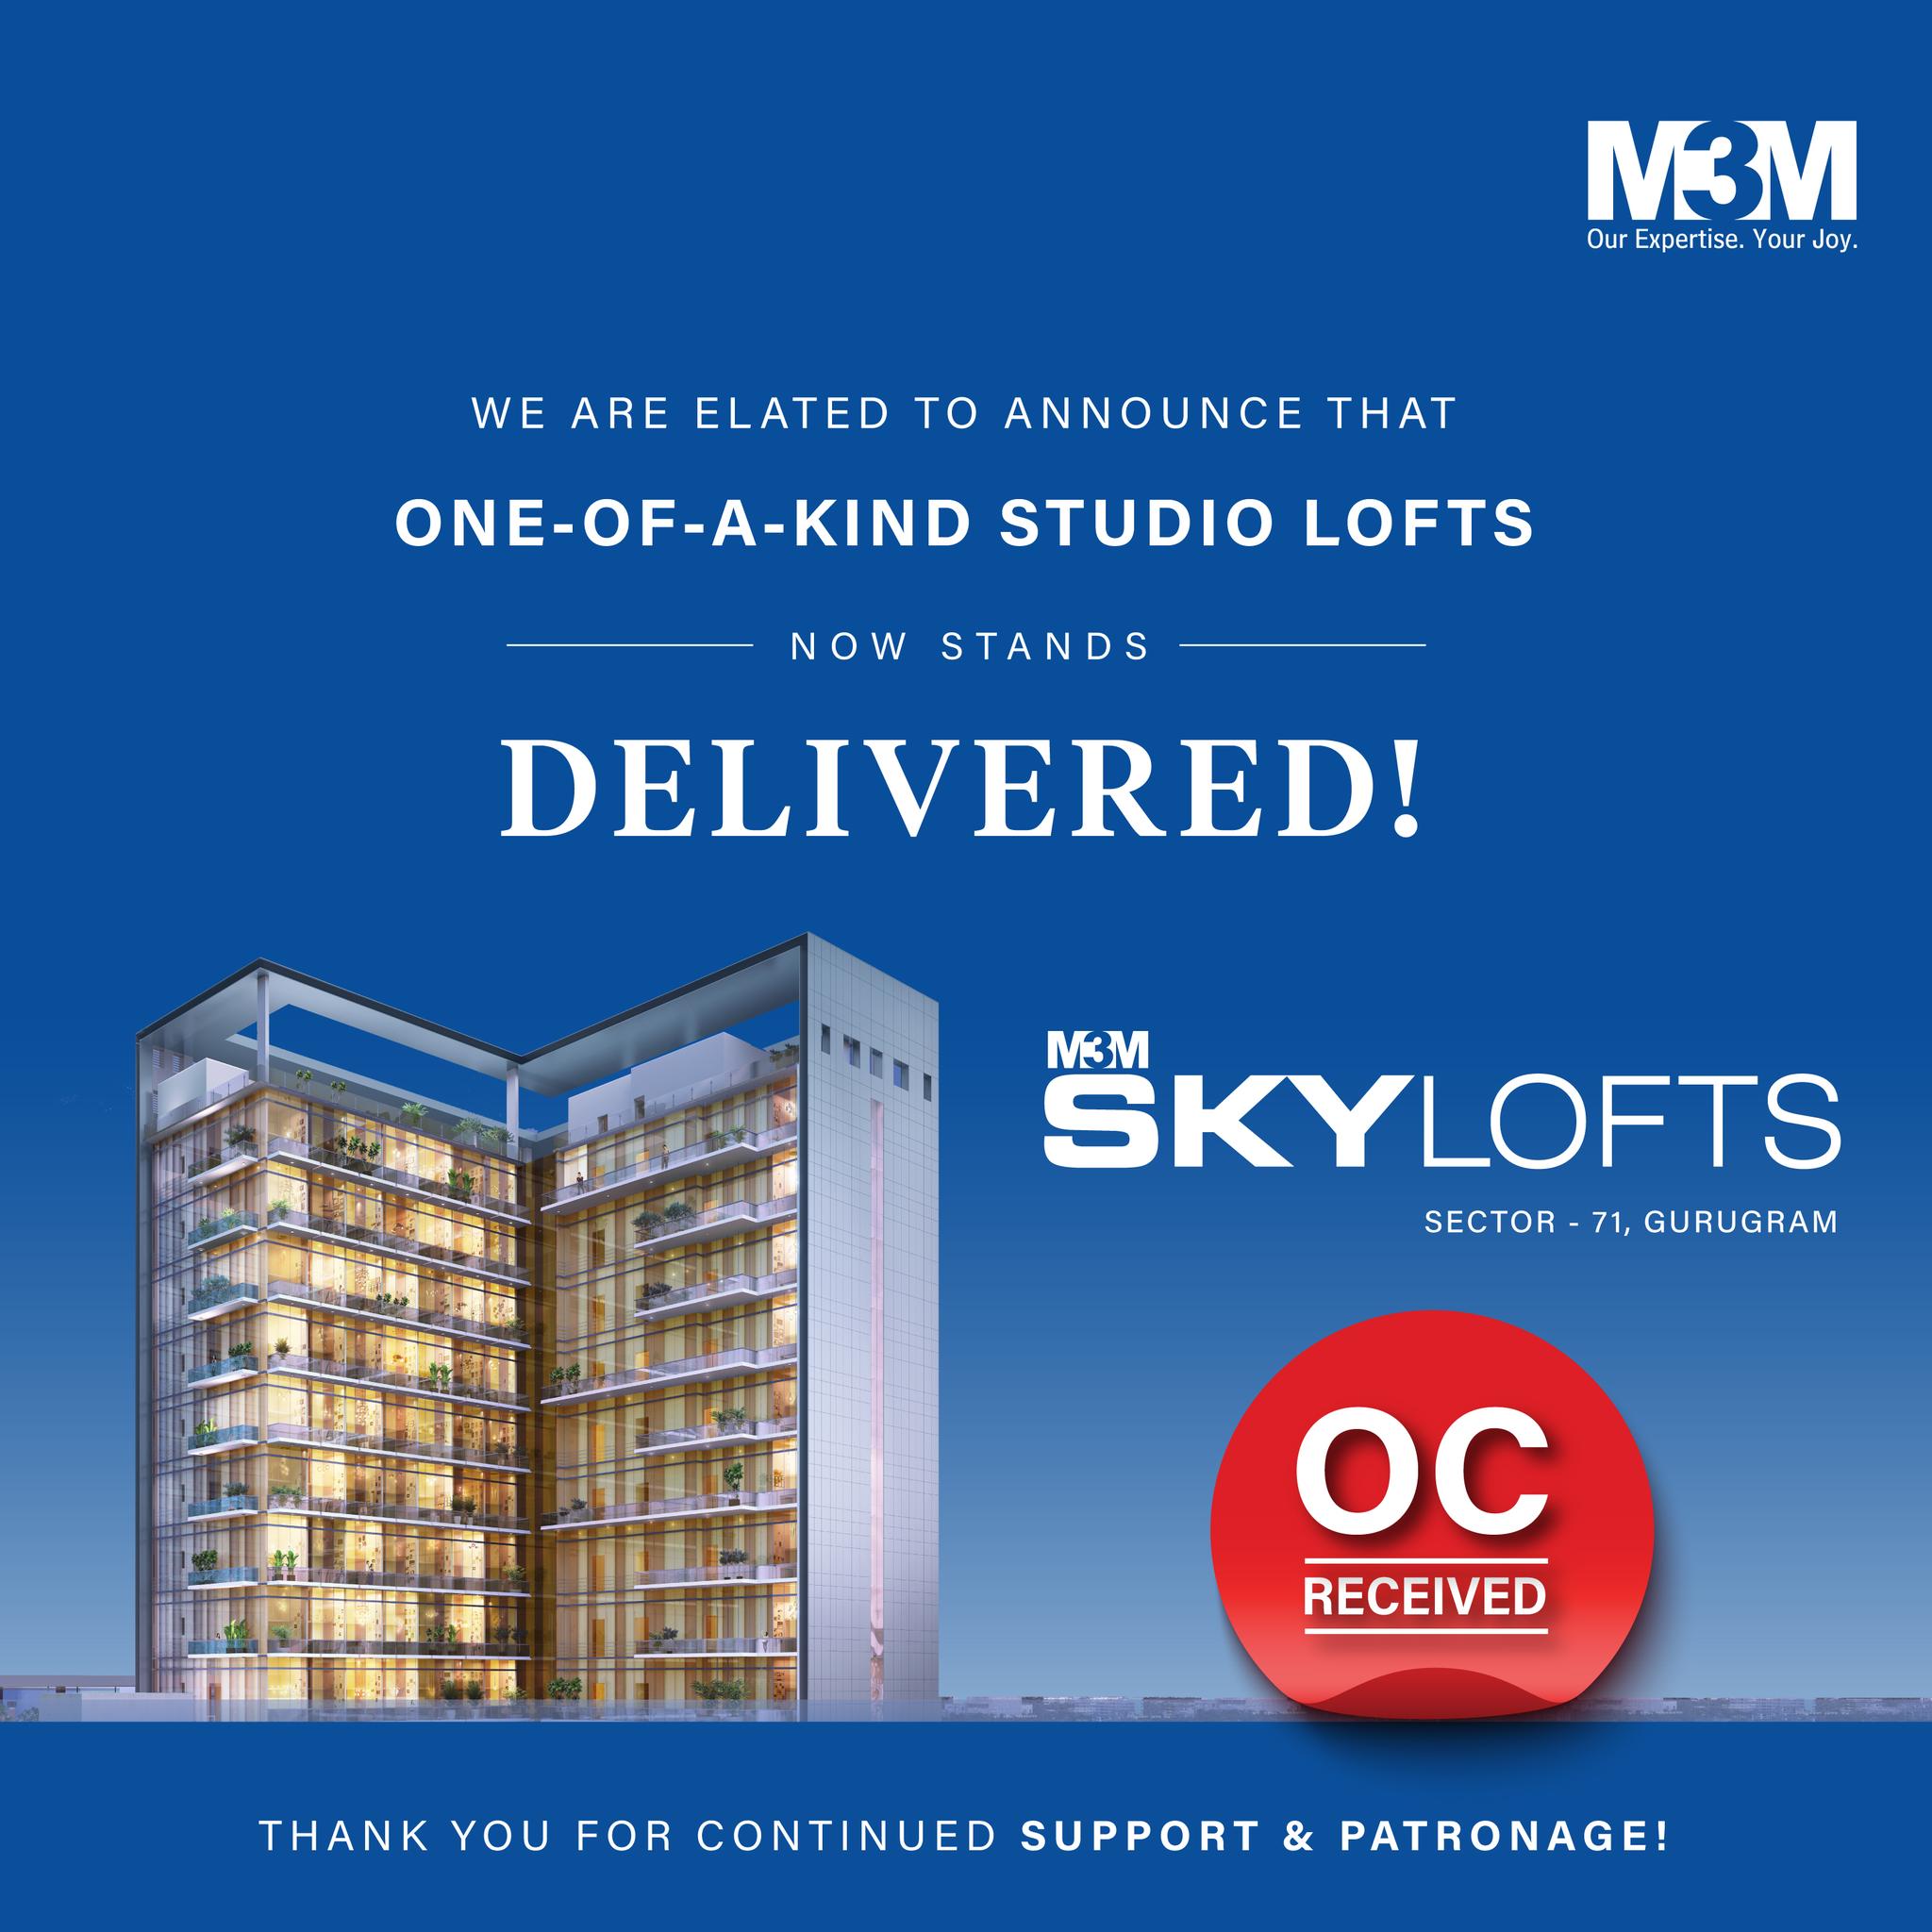 We are elated to announce that one-of-a-kind studio lofts now stands  delivered at M3M Sky Lofts, Gurgaon